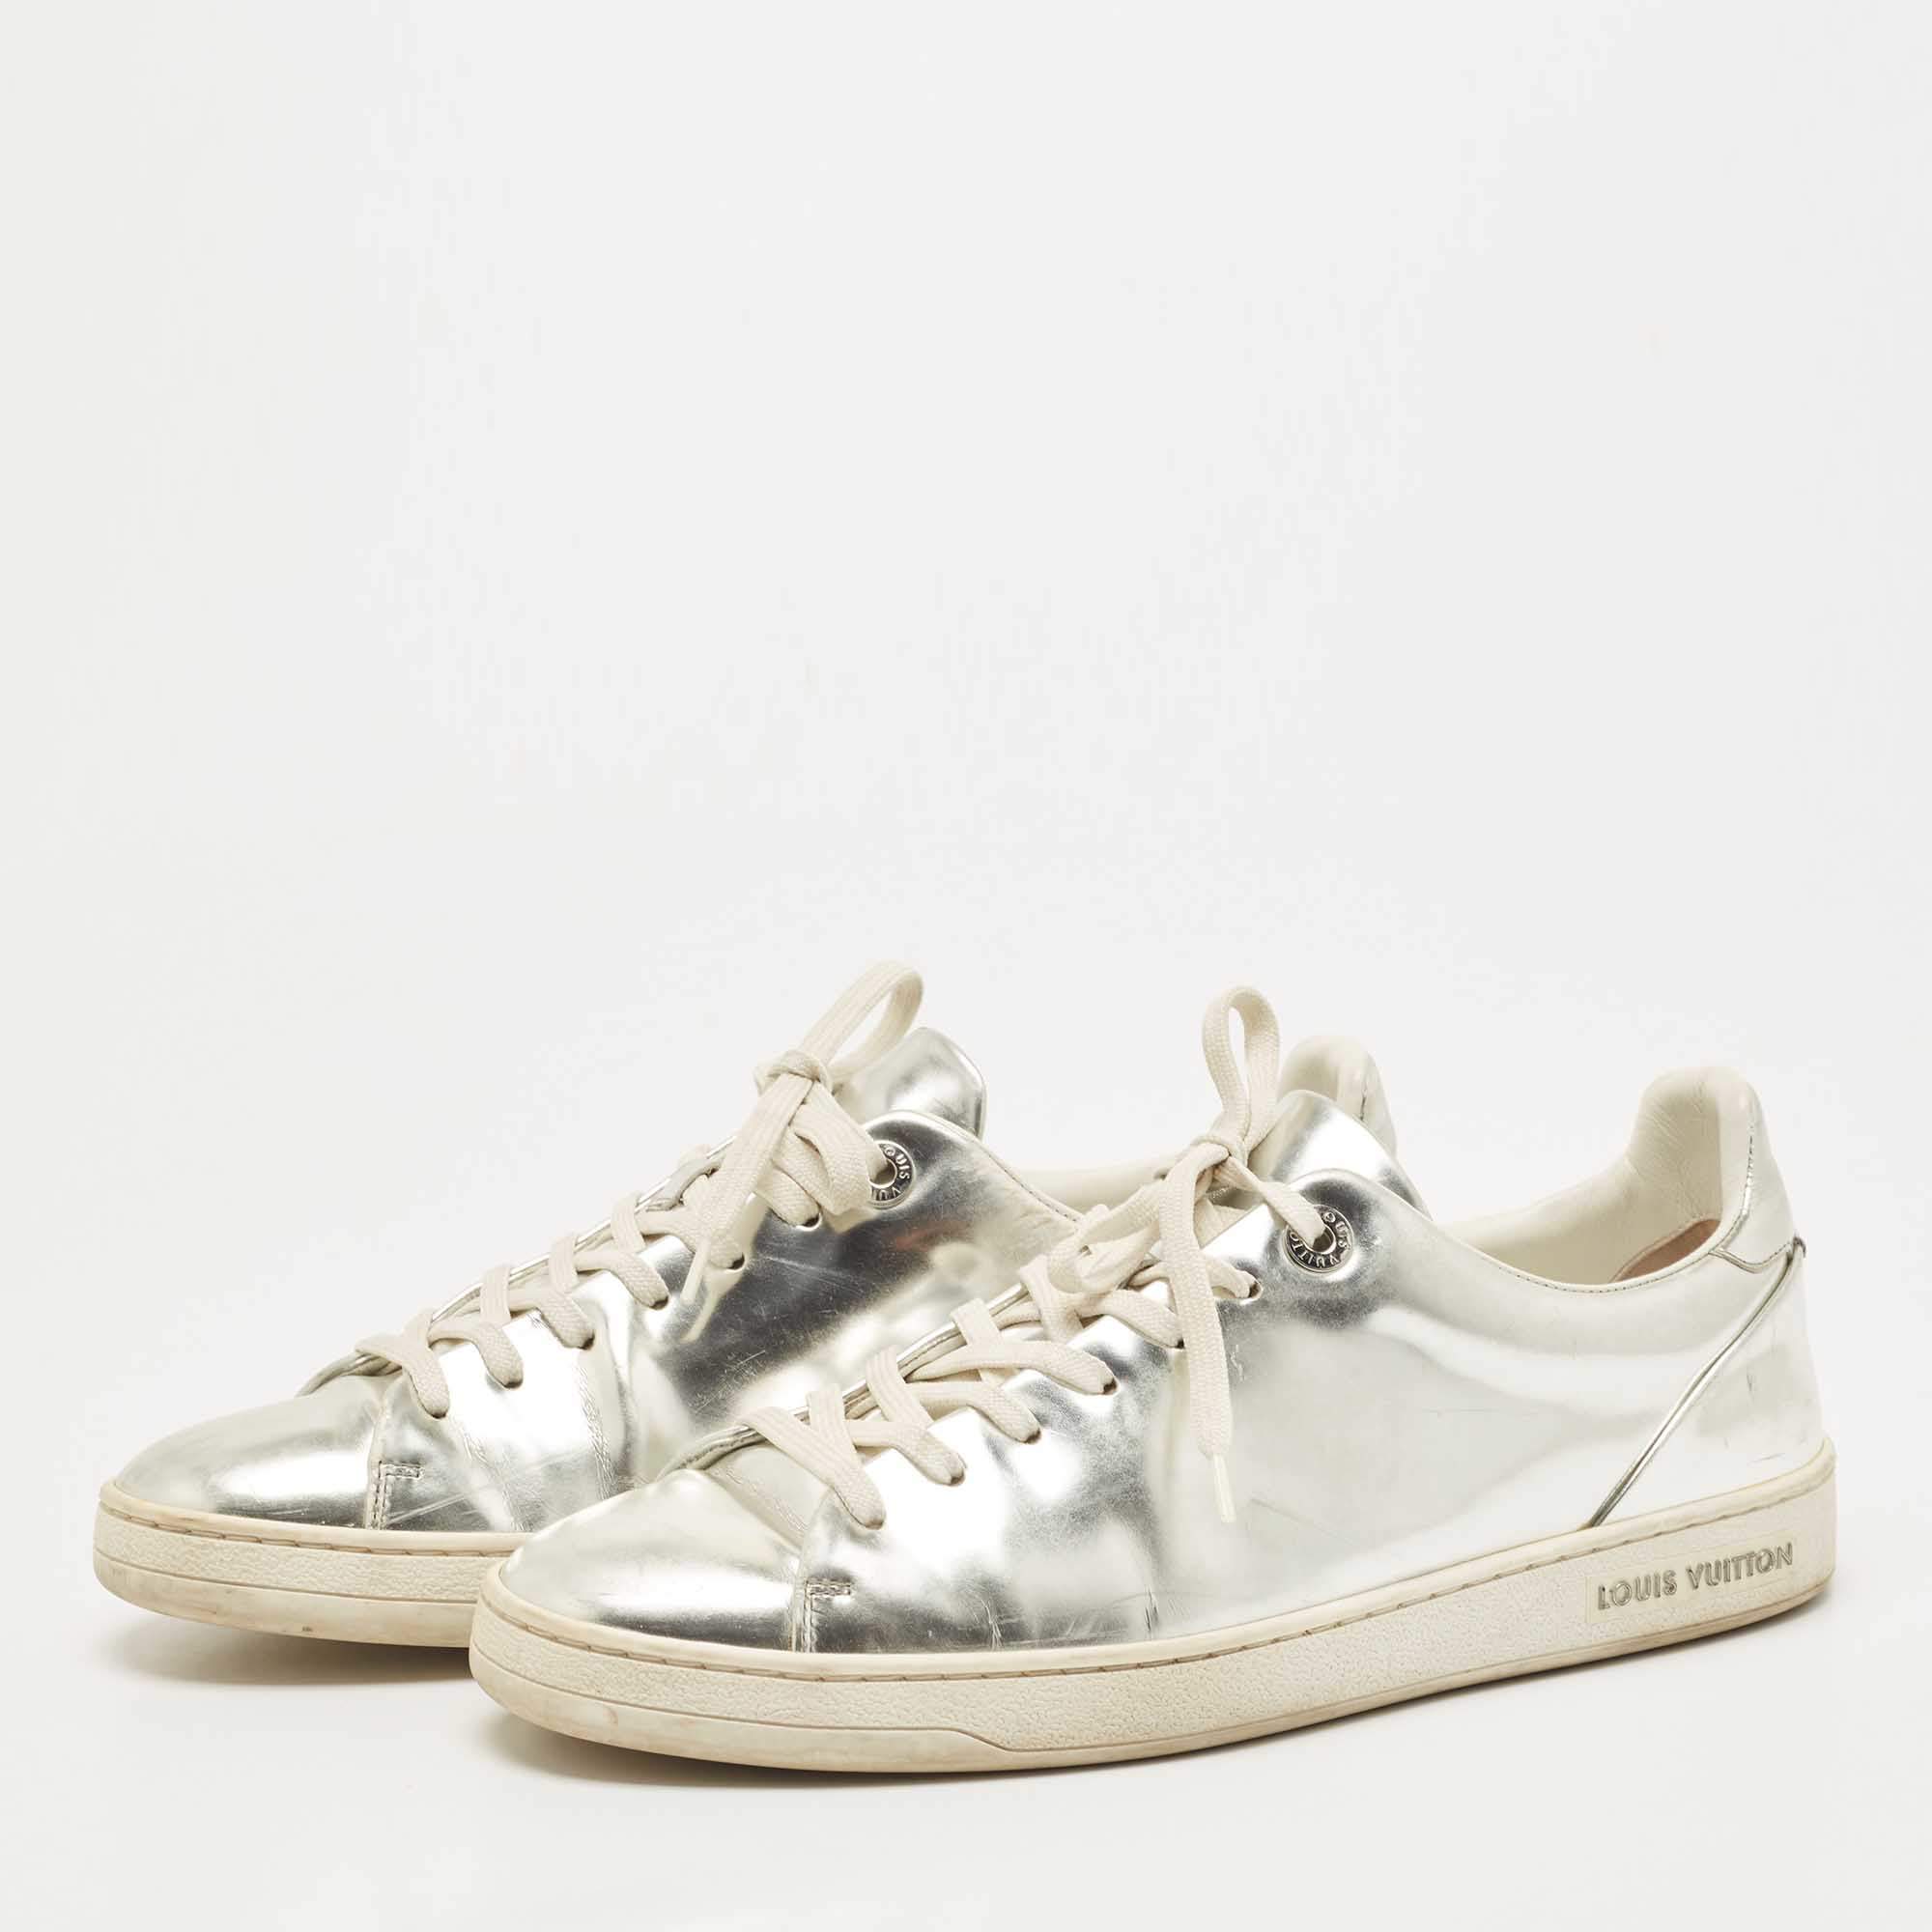 Louis Vuitton Silver Leather Frontrow Sneakers Size 38.5 Louis